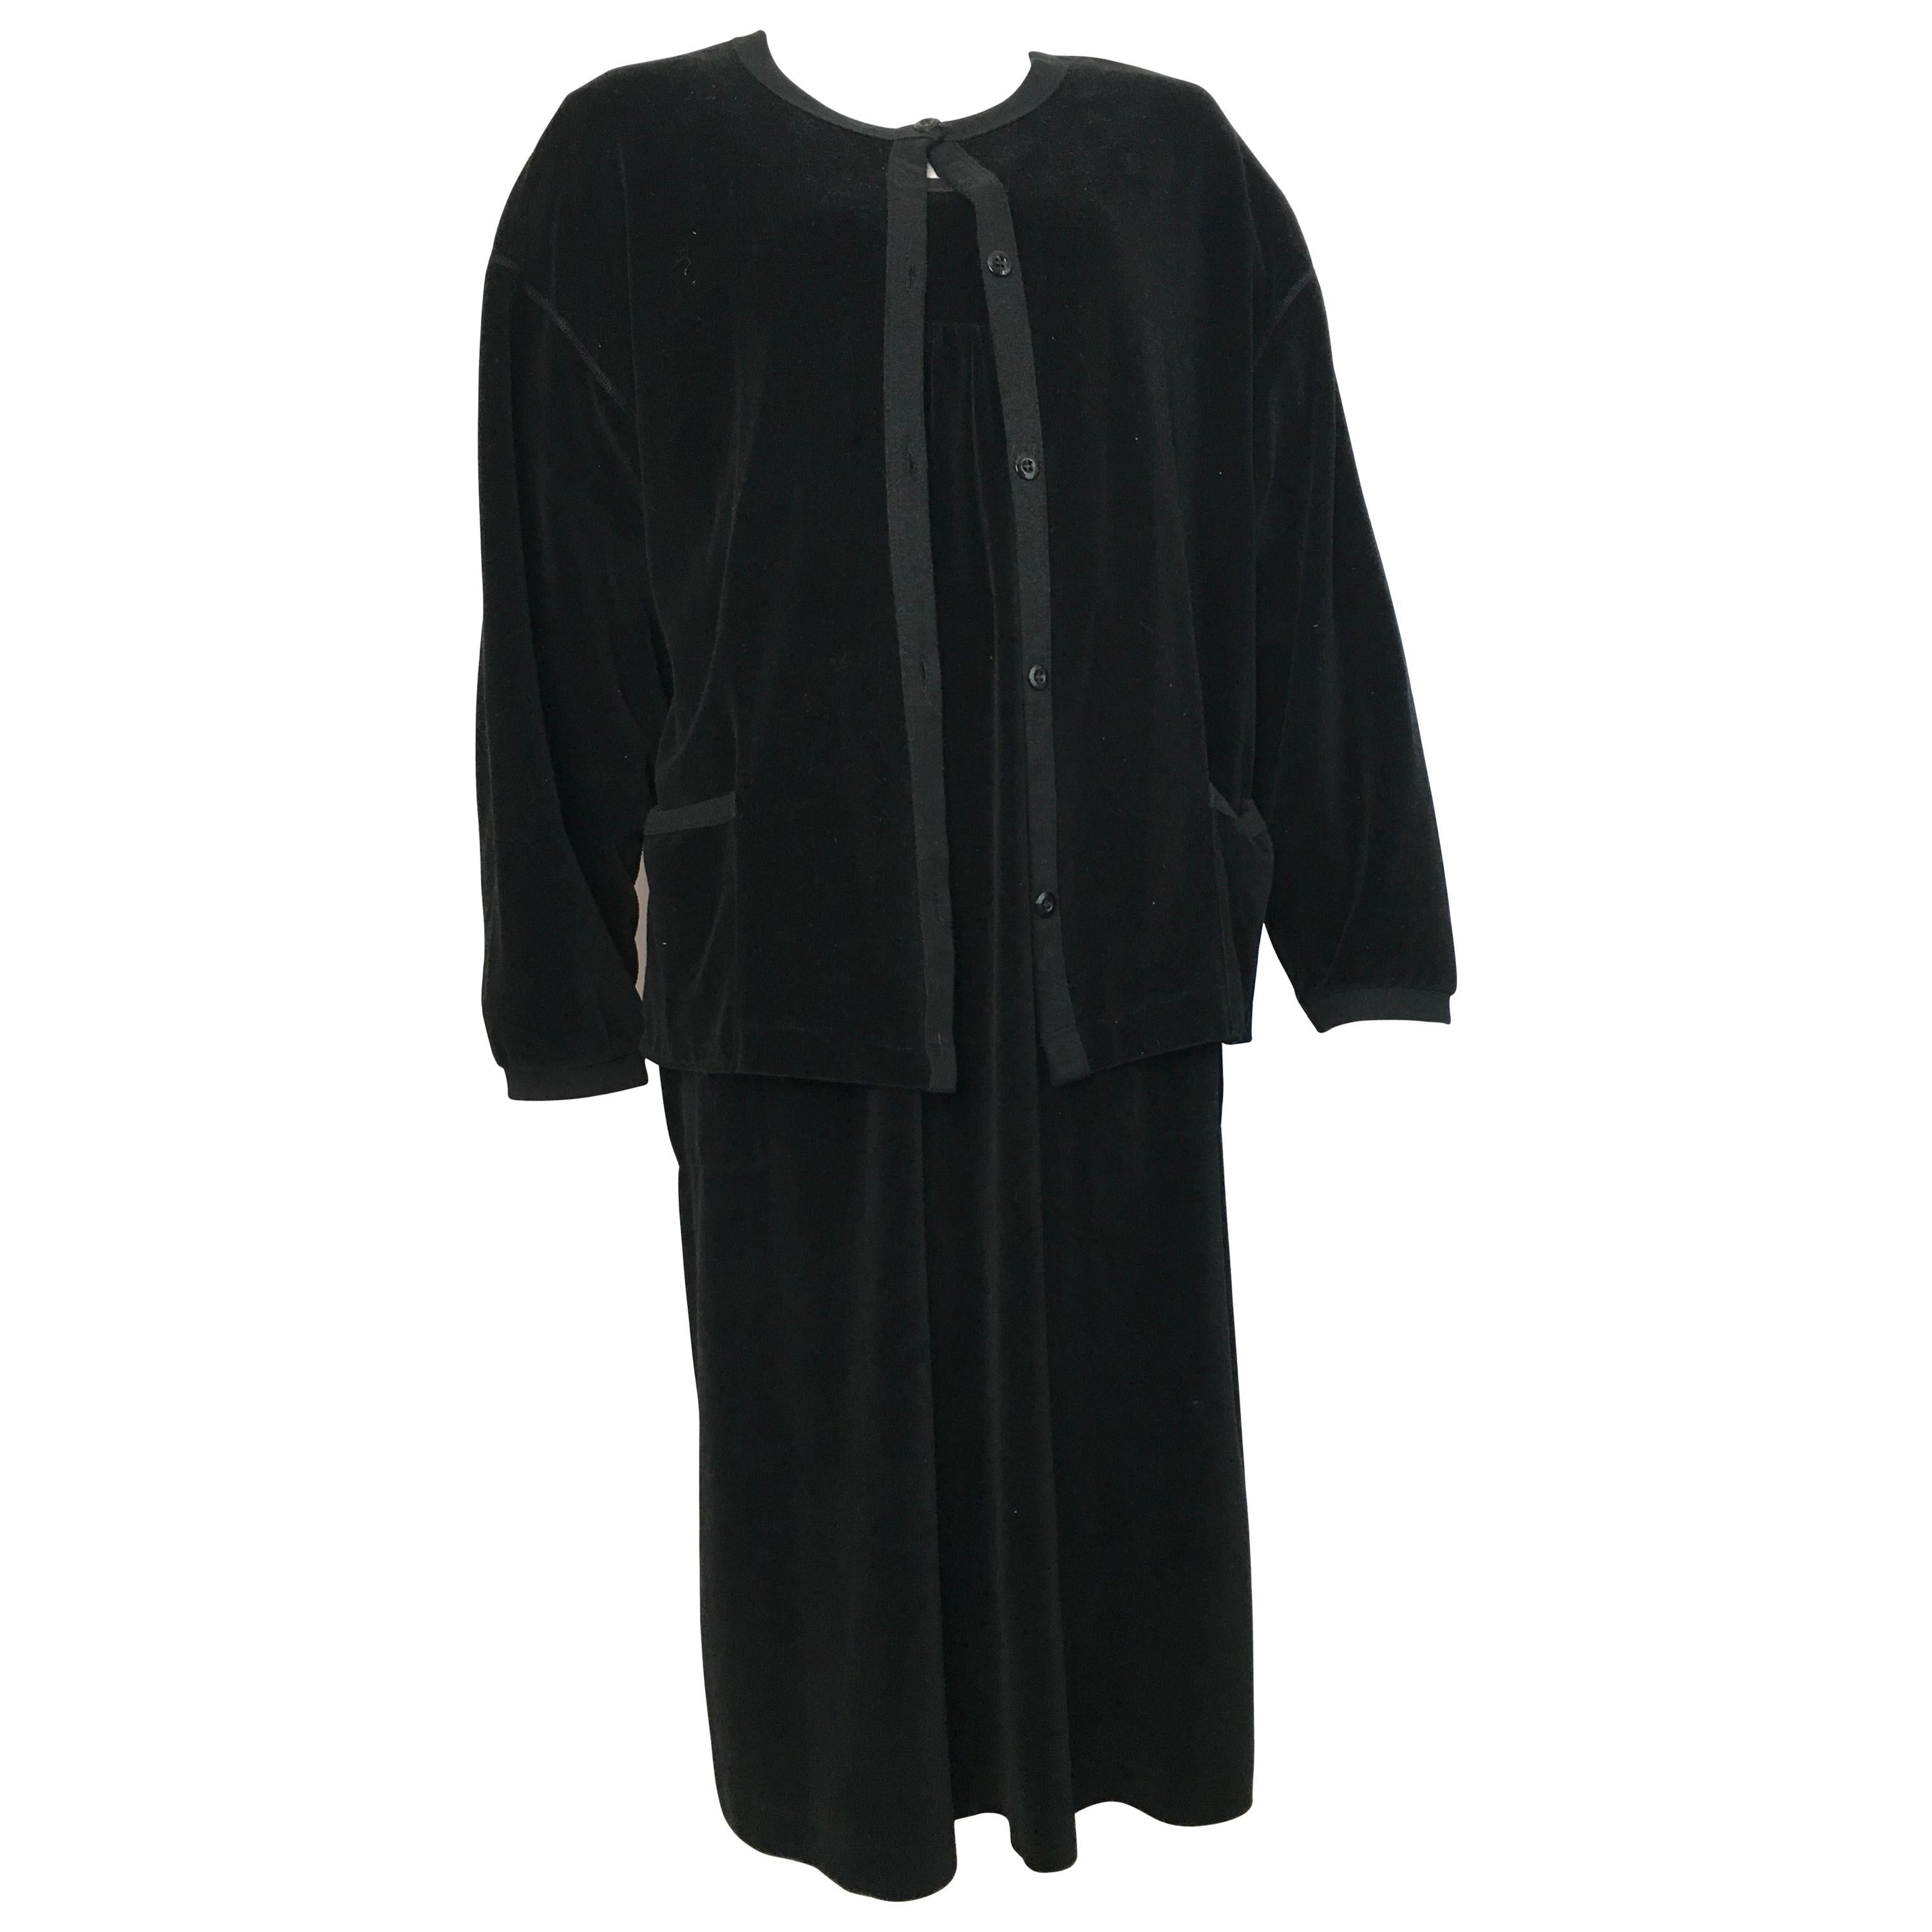 Sonia Rykiel 1980s Black Velour Dress with Pockets & Cardigan Size Large. For Sale